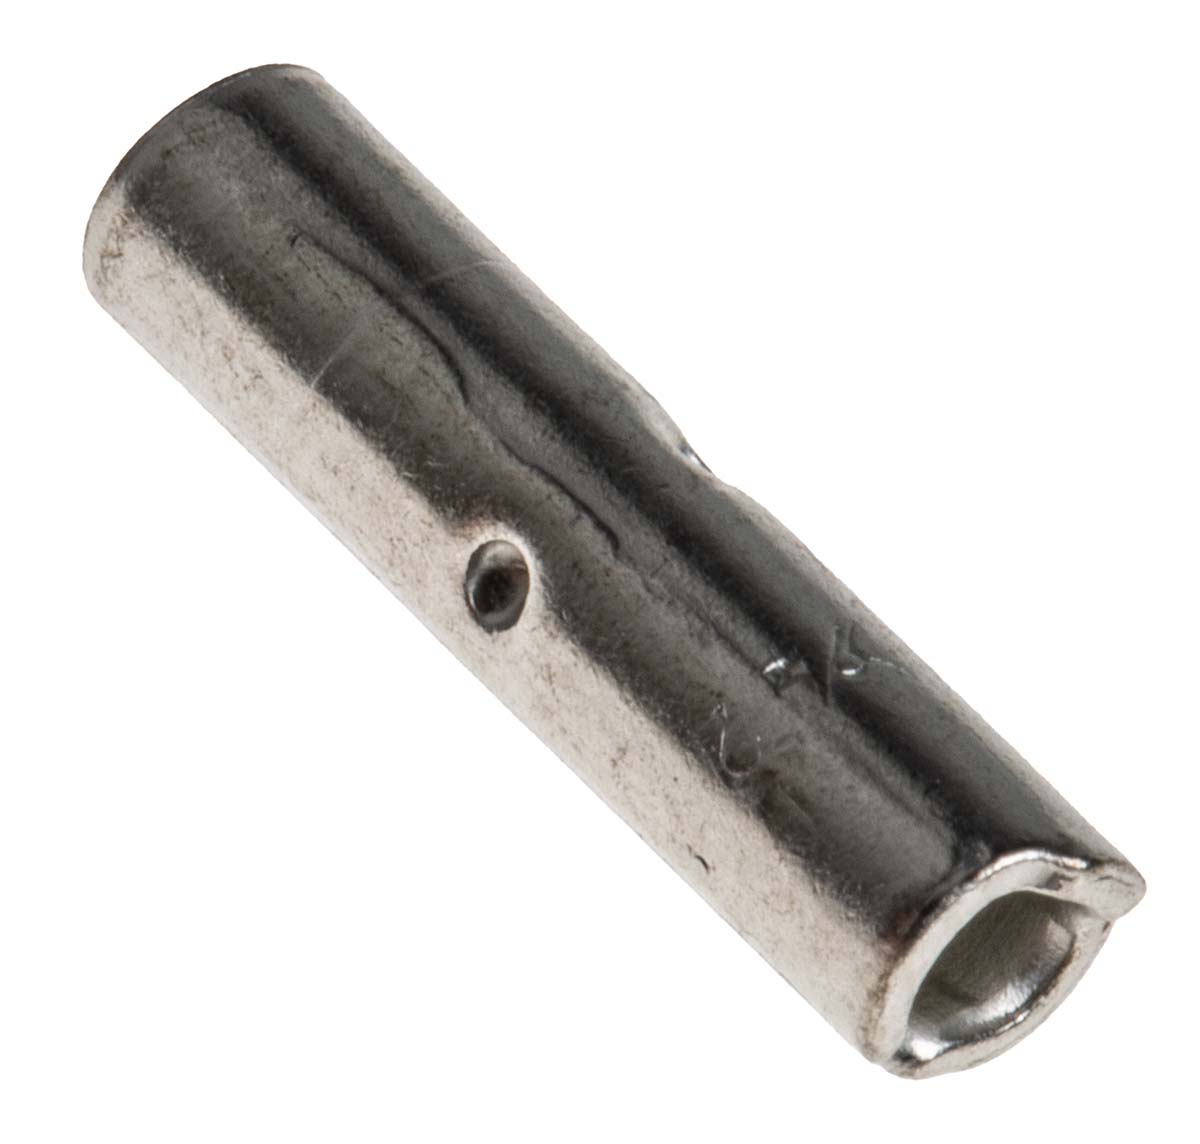 RS PRO Butt Splice Connector, Tin 1 → 2.5 mm²